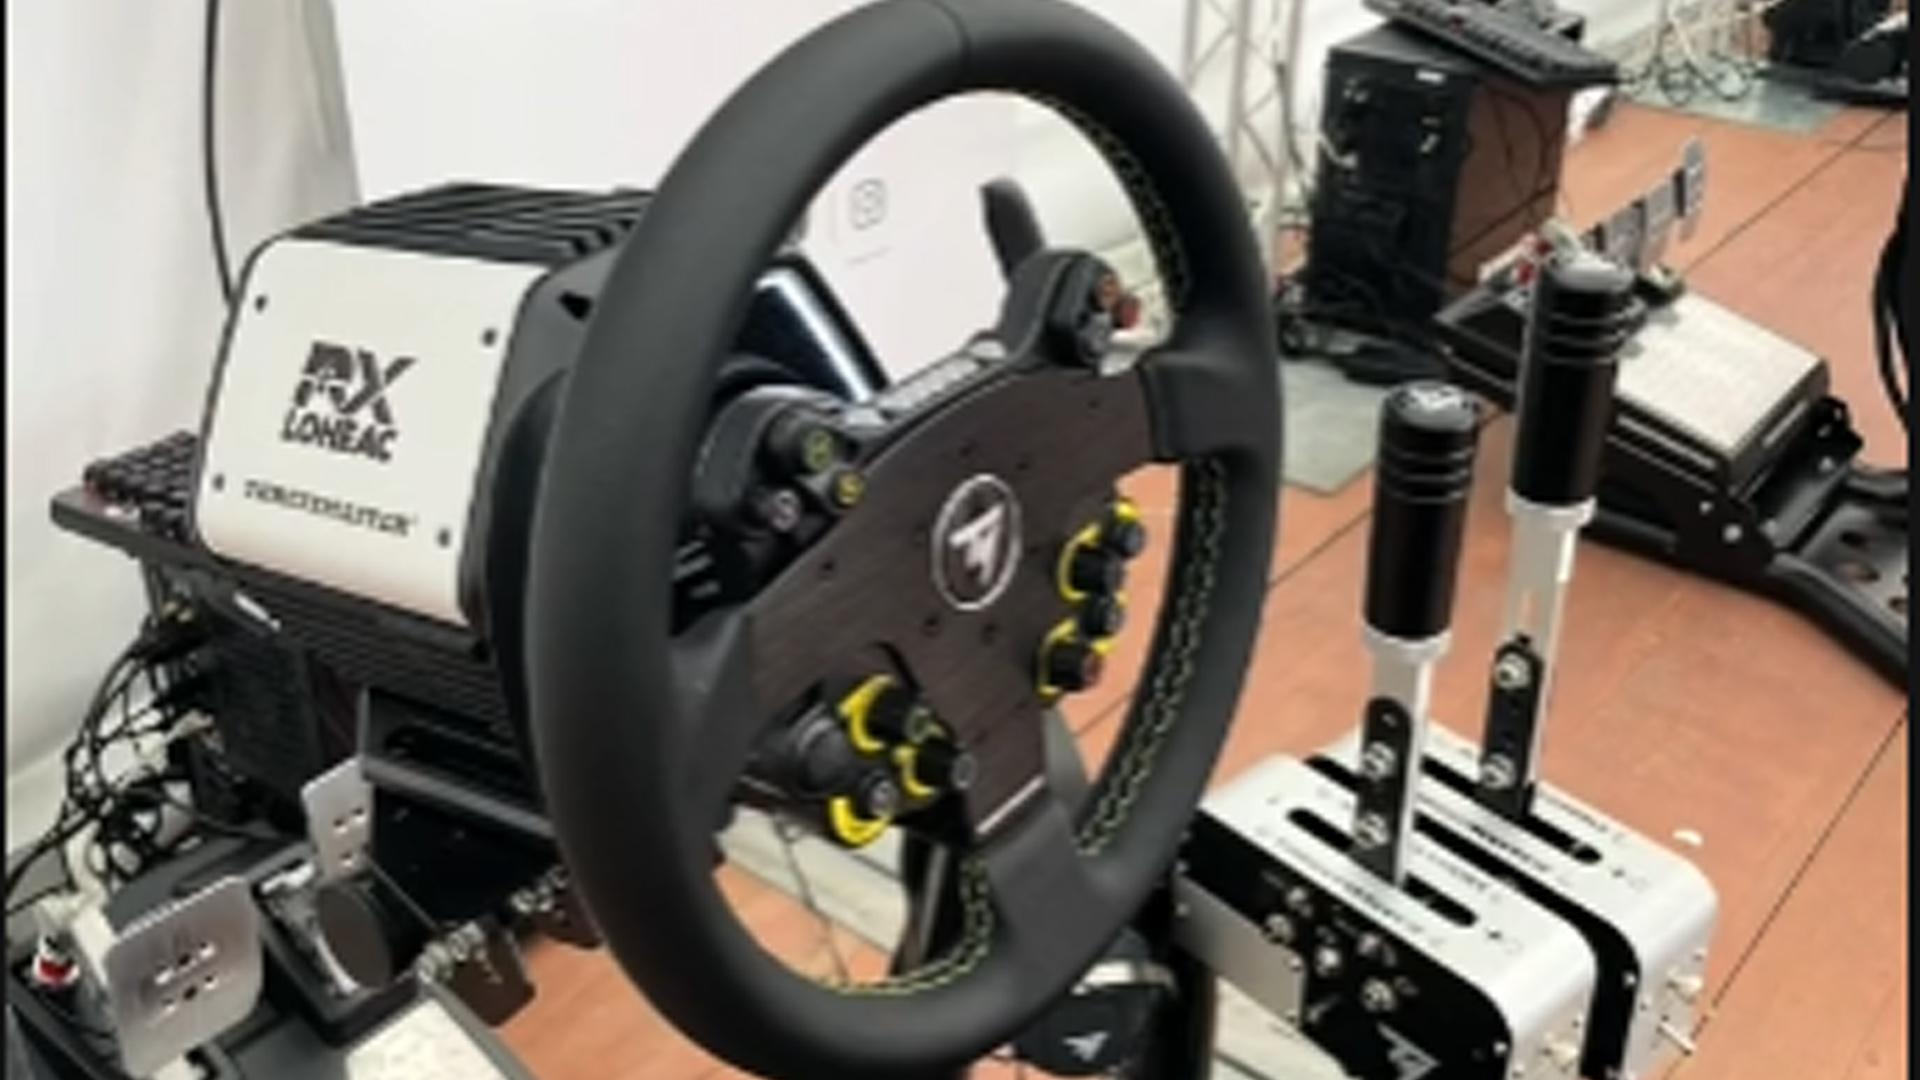 The Crew Motorfest Steering Wheel and Peripheral support detailed